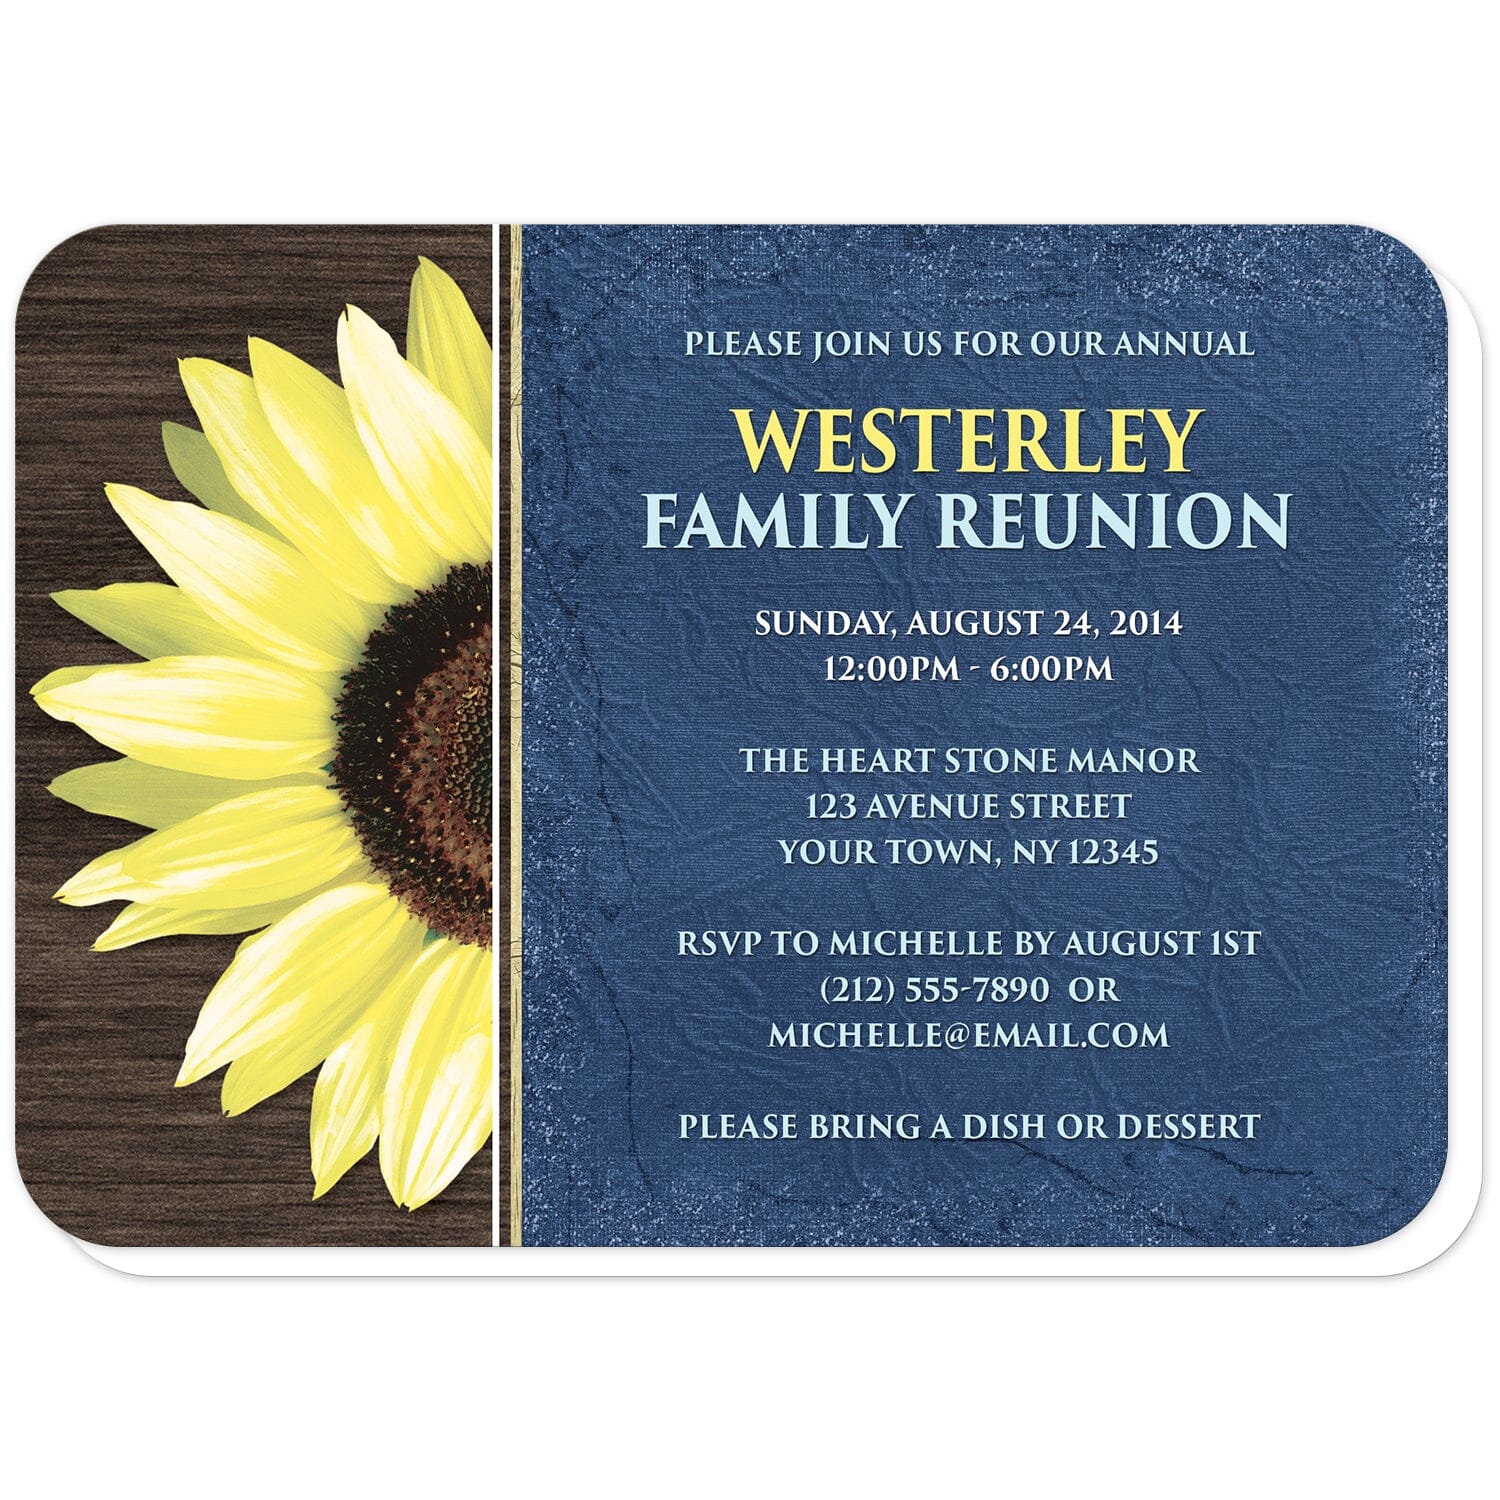 Rustic Sunflower with Blue Family Reunion Invitations (with rounded corners) at Artistically Invited. Country-inspired rustic sunflower with blue family reunion invitations featuring a vibrant bright yellow sunflower over a textured dark brown wood design along the left side. Your personalized reunion celebration details are custom printed in yellow and white over a tattered blue cloth illustration to the right of the sunflower.